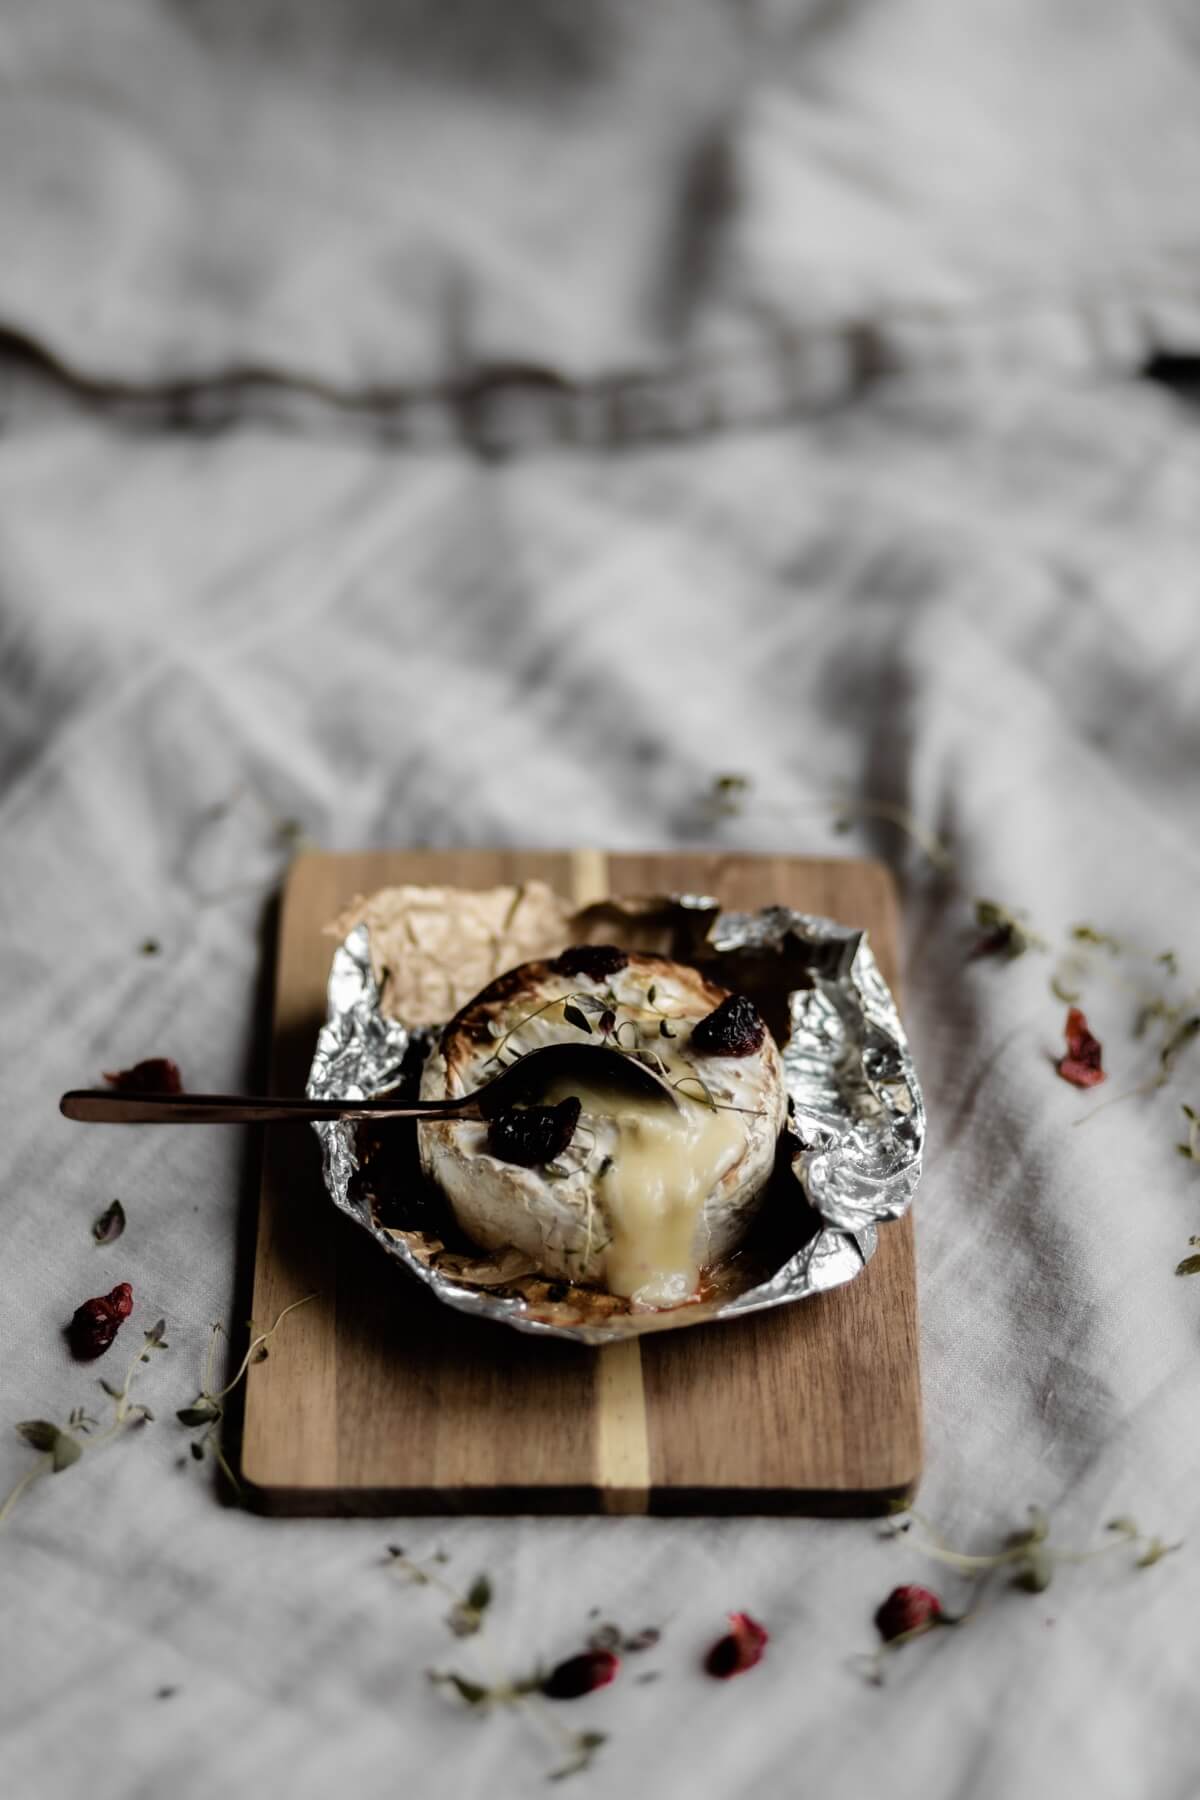 add baked brie to make a gorgeous cheese plate